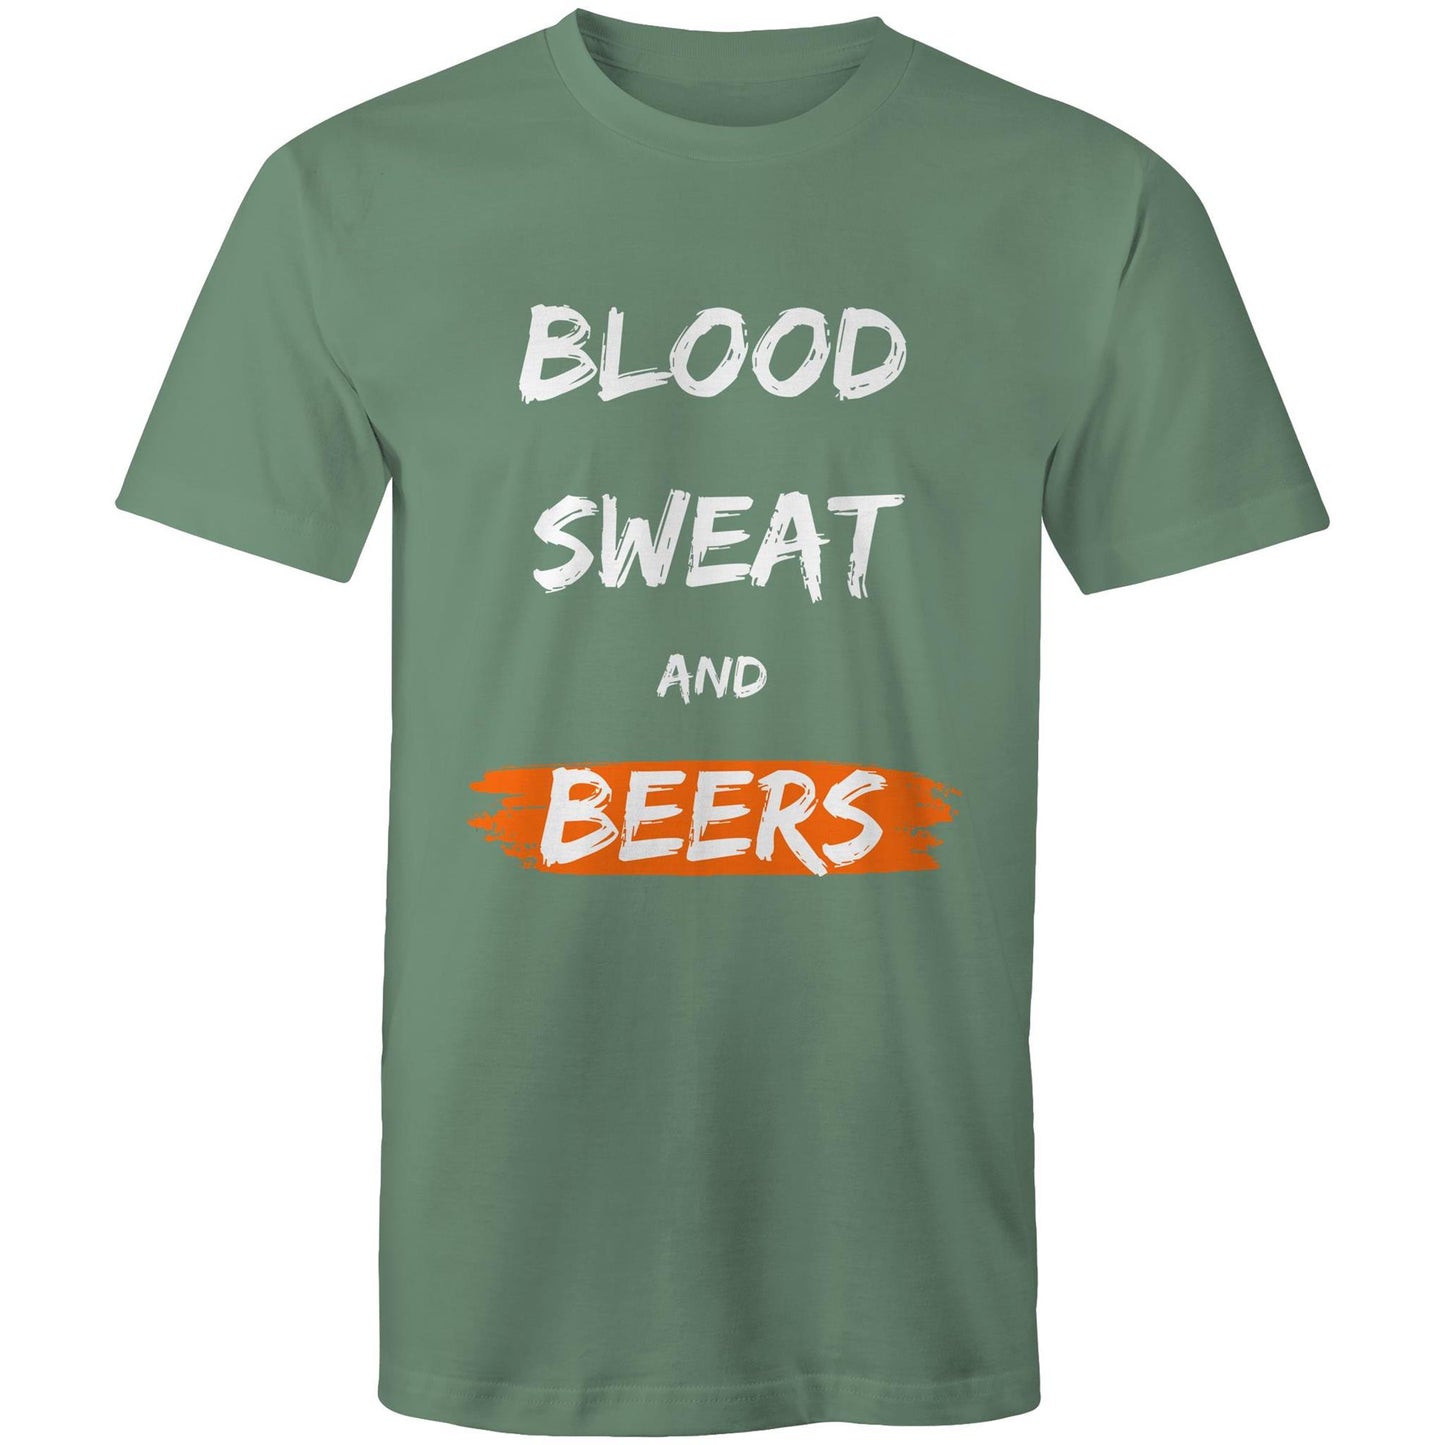 Blood, Sweat and Beers - Mens T-Shirt